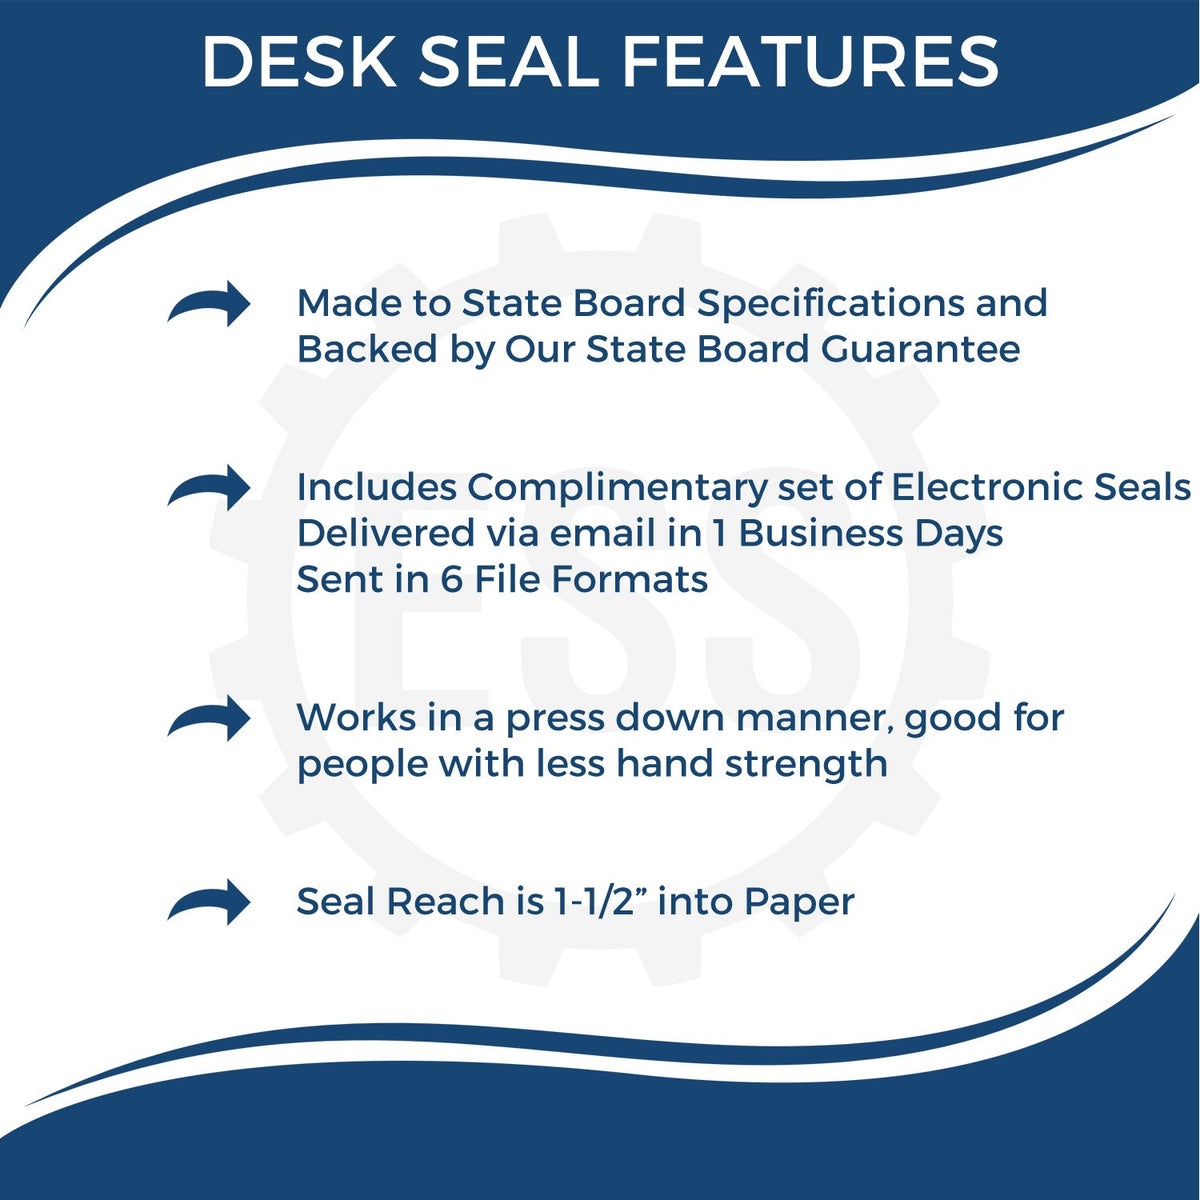 A picture of an infographic highlighting the selling points for the Michigan Engineer Desk Seal